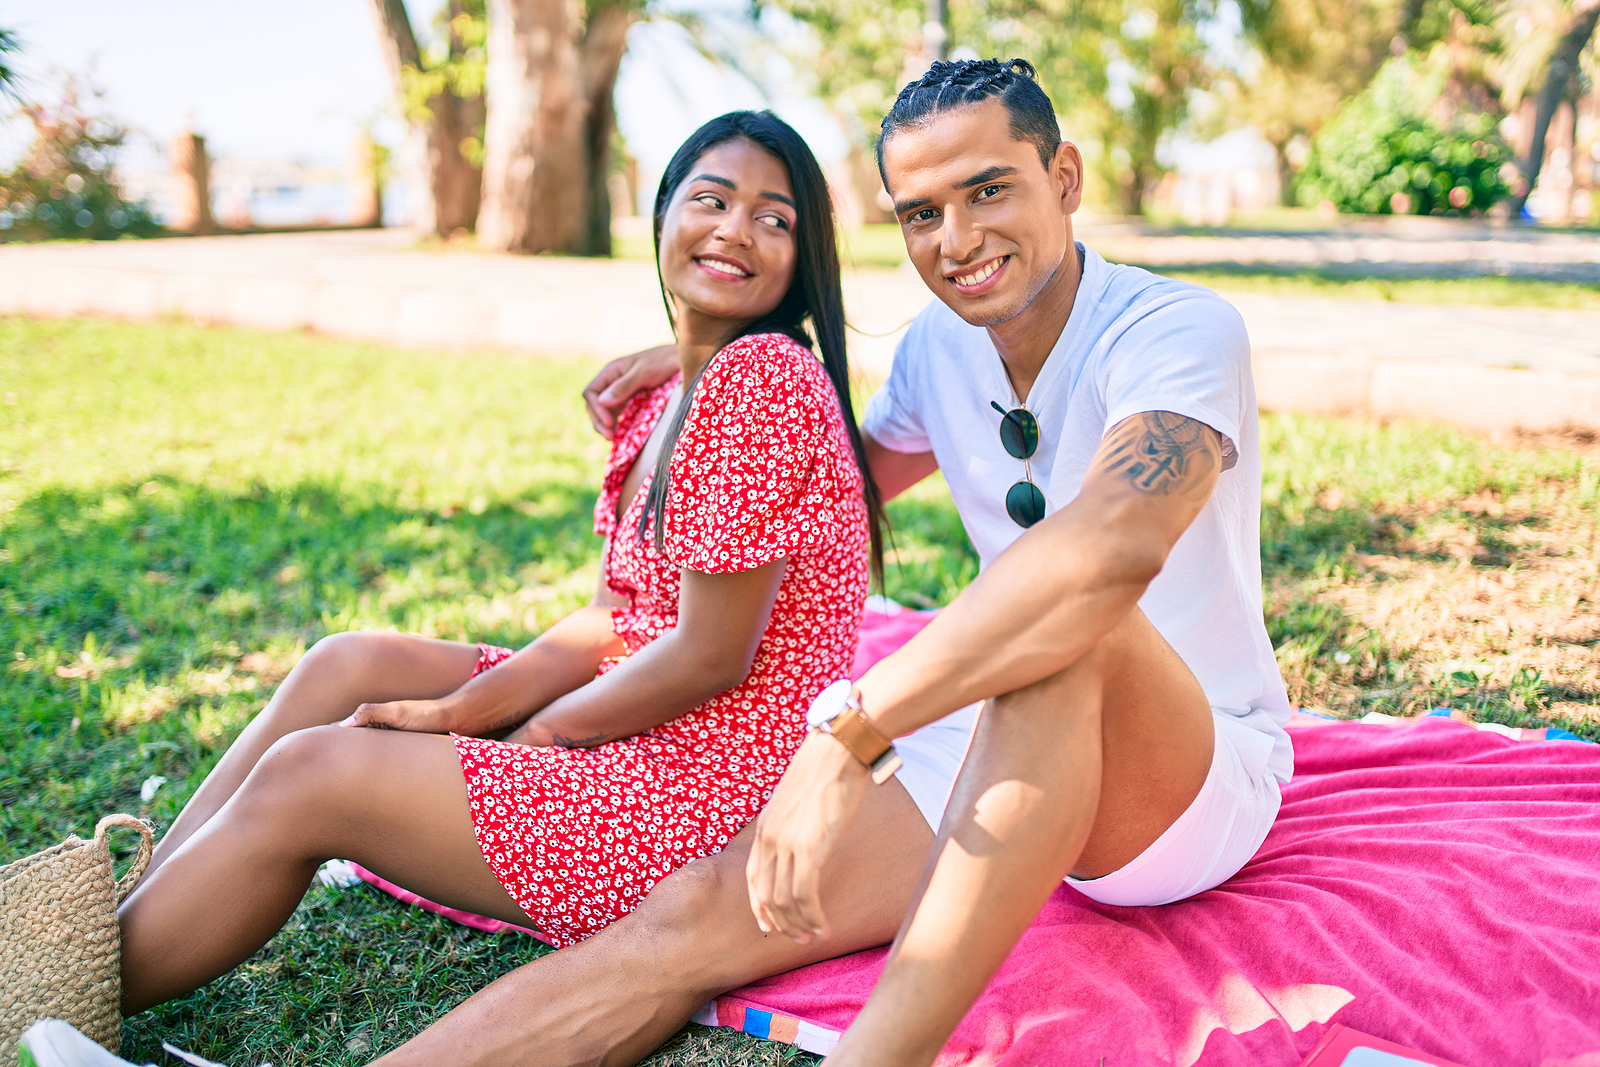 A young man with an arm around a smiling young woman. They're sitting on a blanket outdoors.